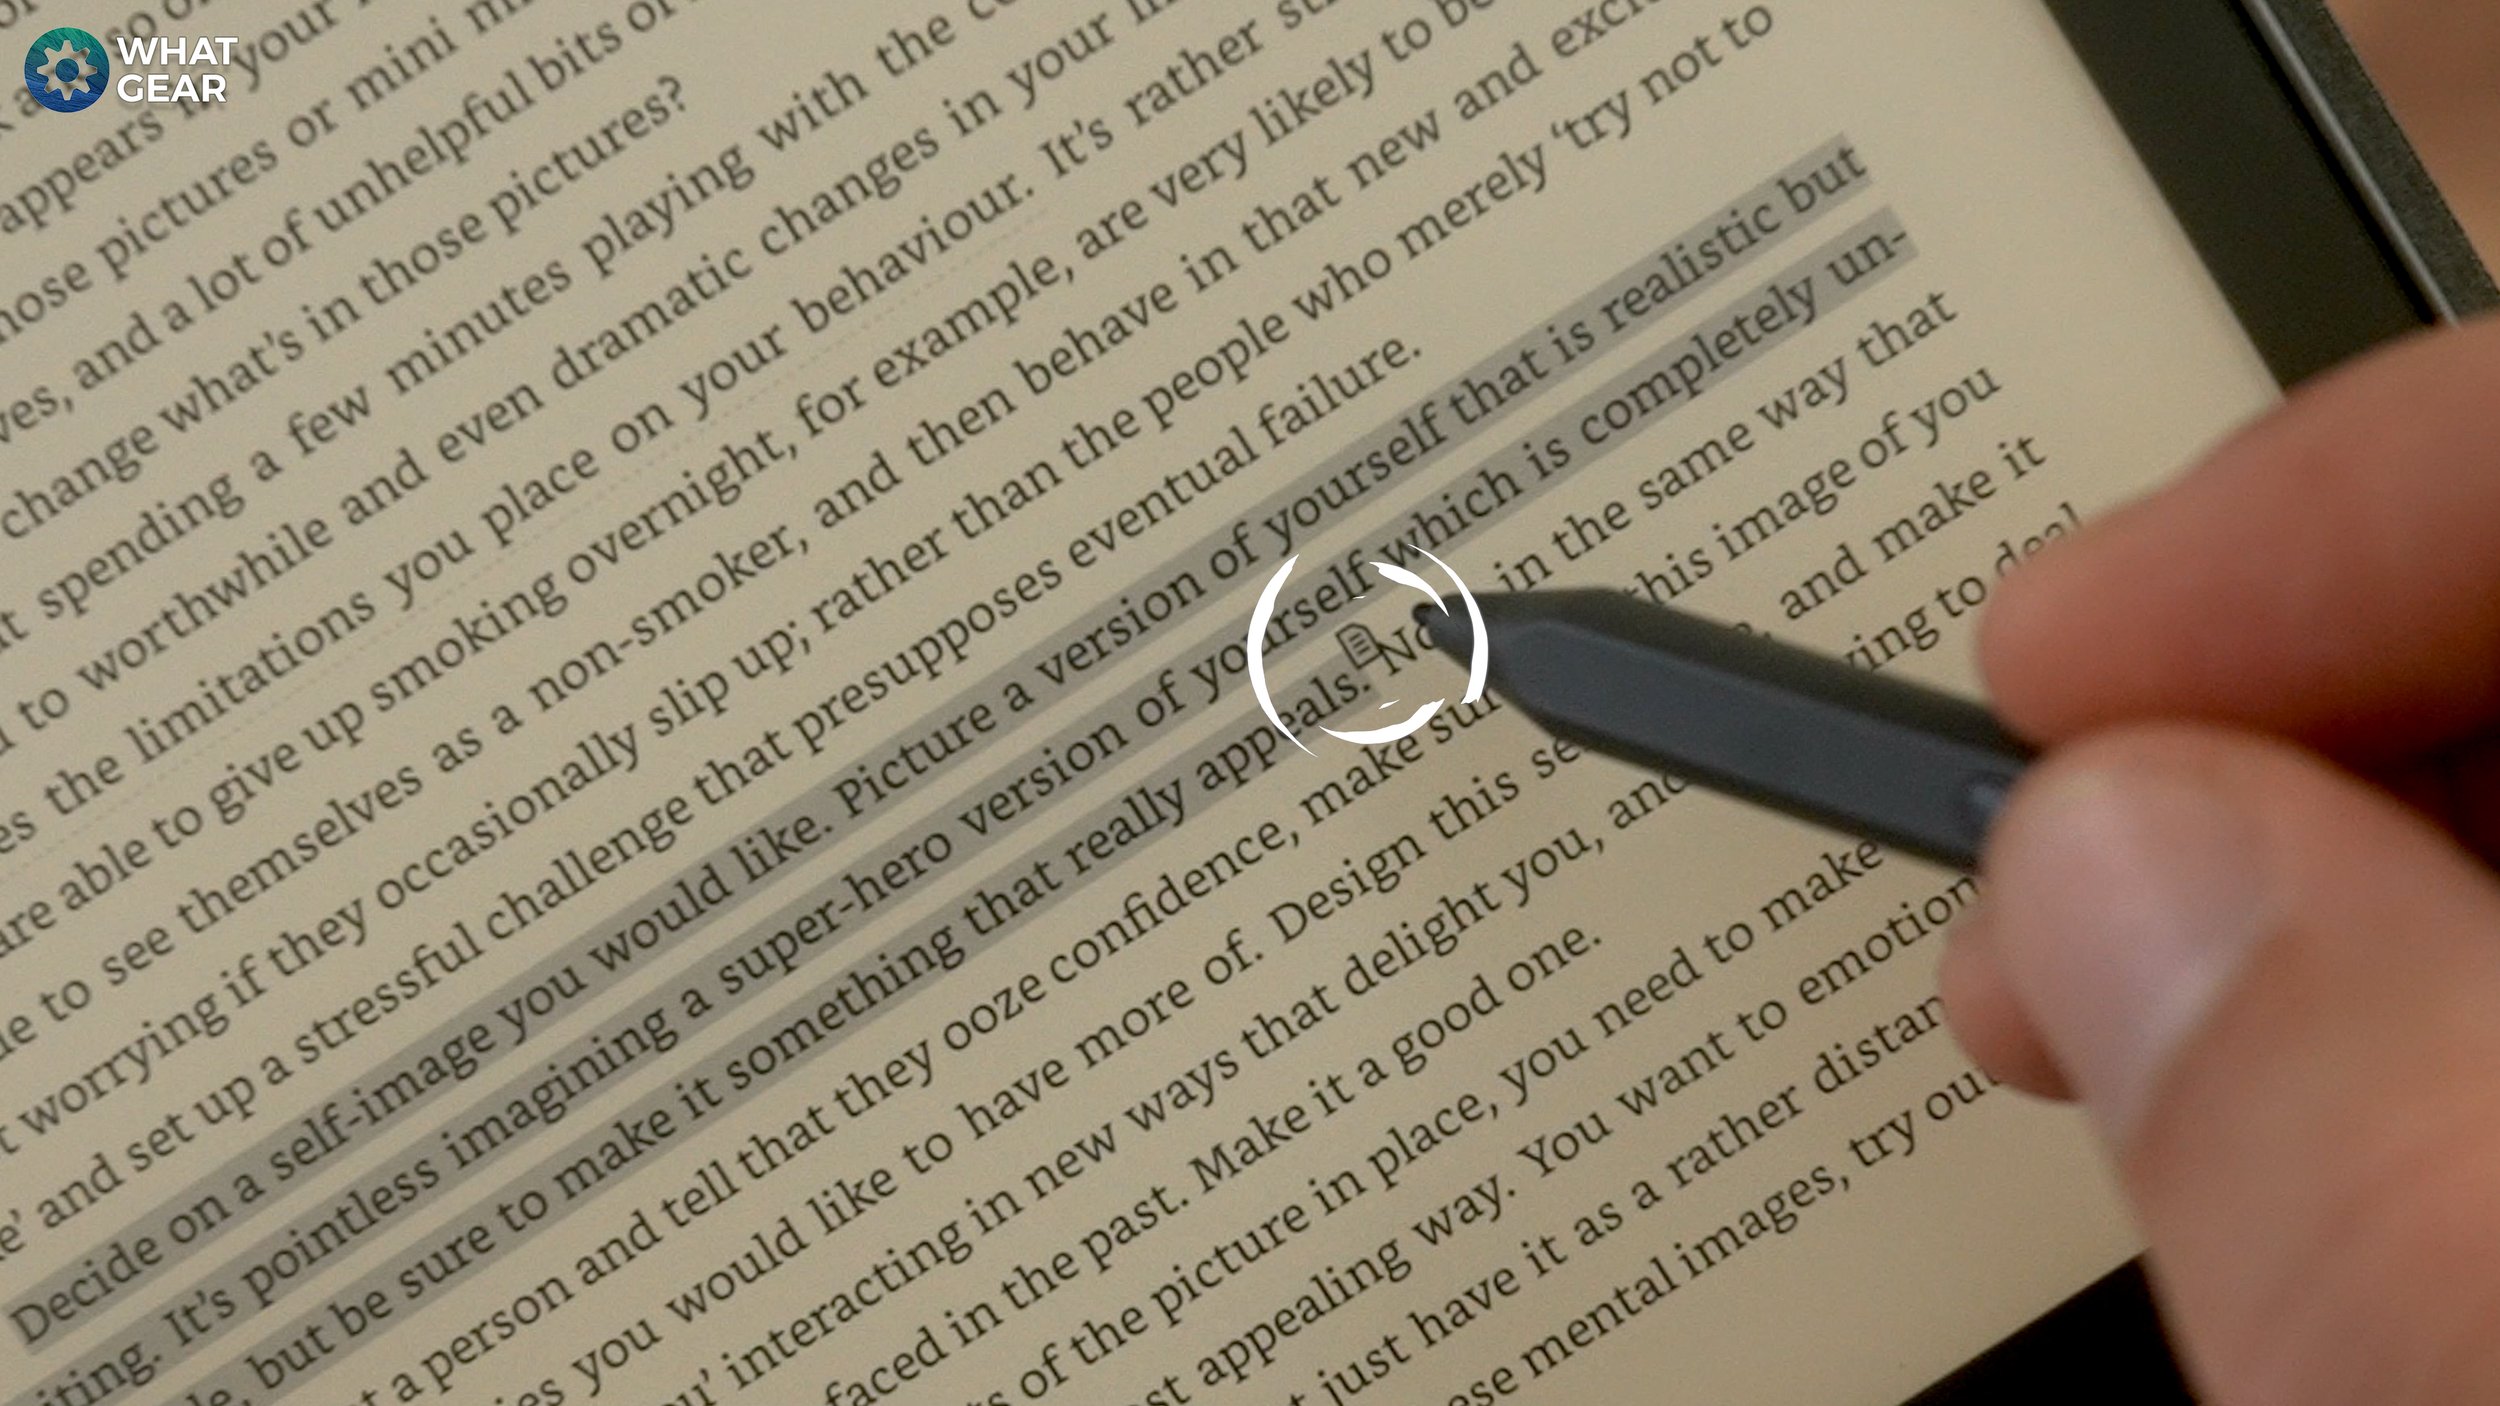 Kindle Scribe tips and tricks: 14 must-try features